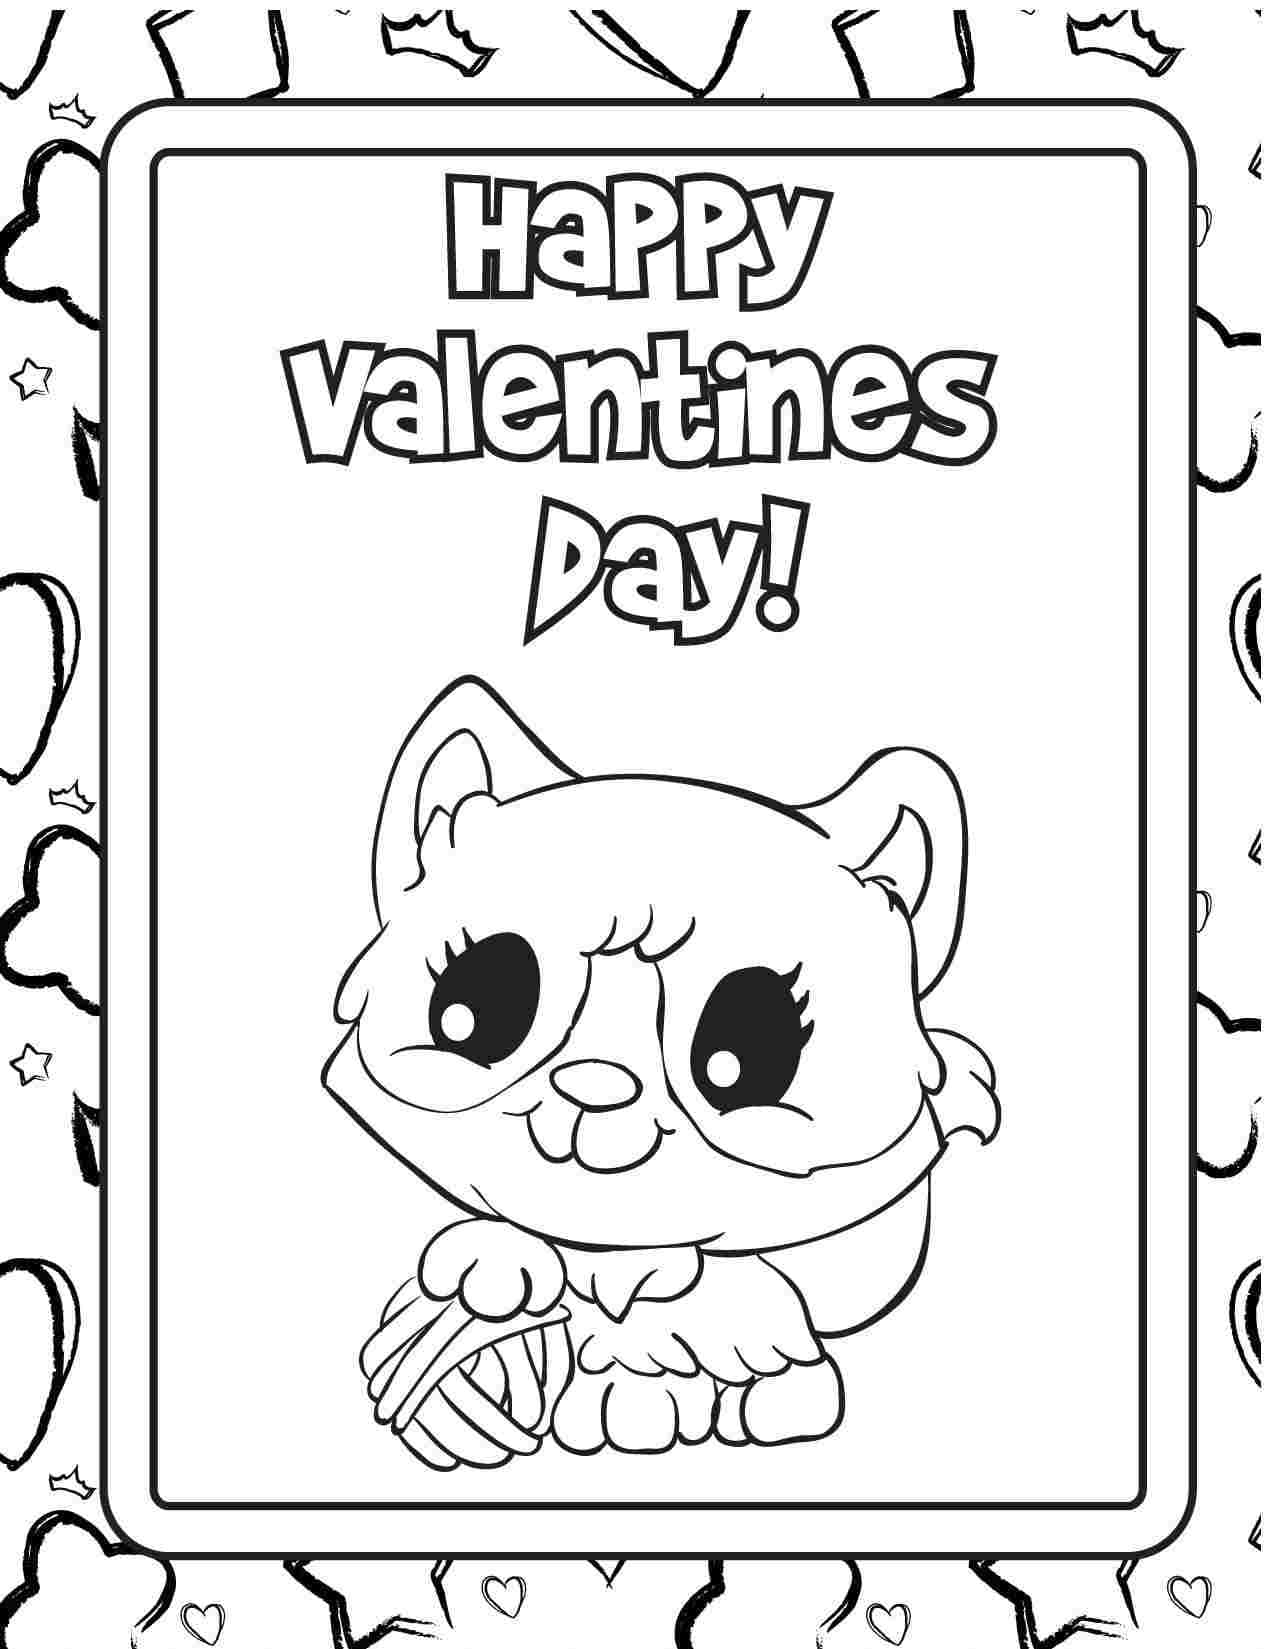 Valentine's Day Coloring Pages For Kids